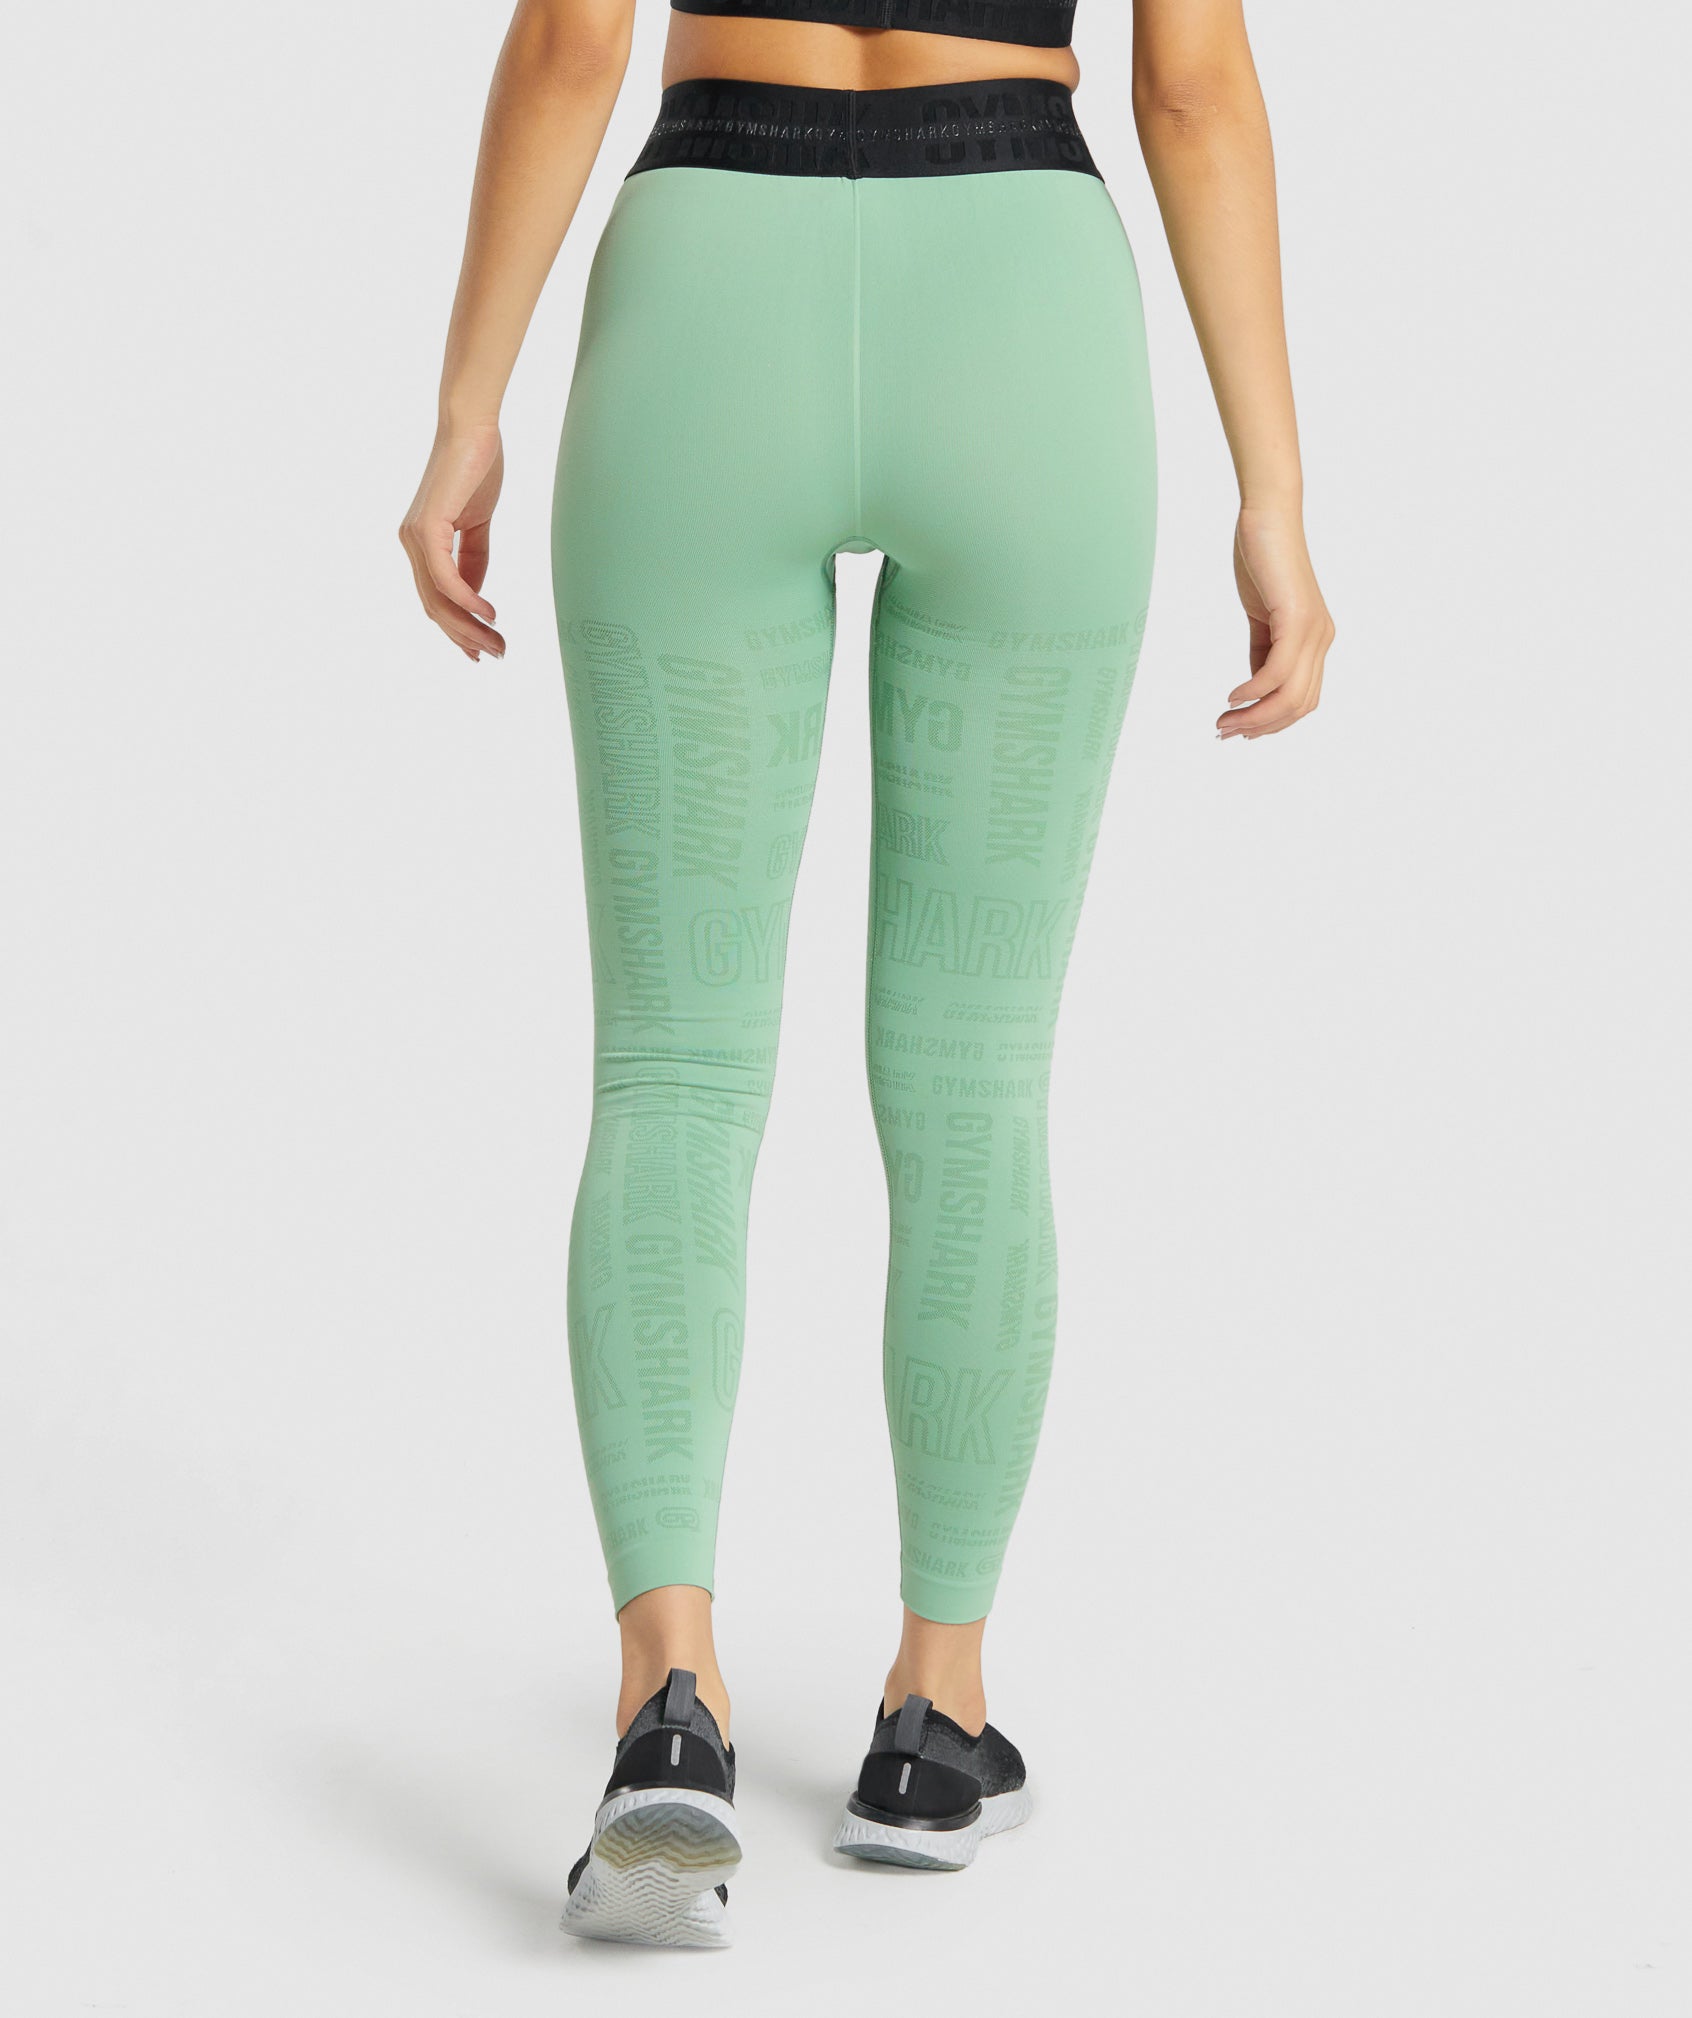 Gymshark Flex high Waisted Leggings Green Size L - $30 (50% Off Retail) -  From Maggie